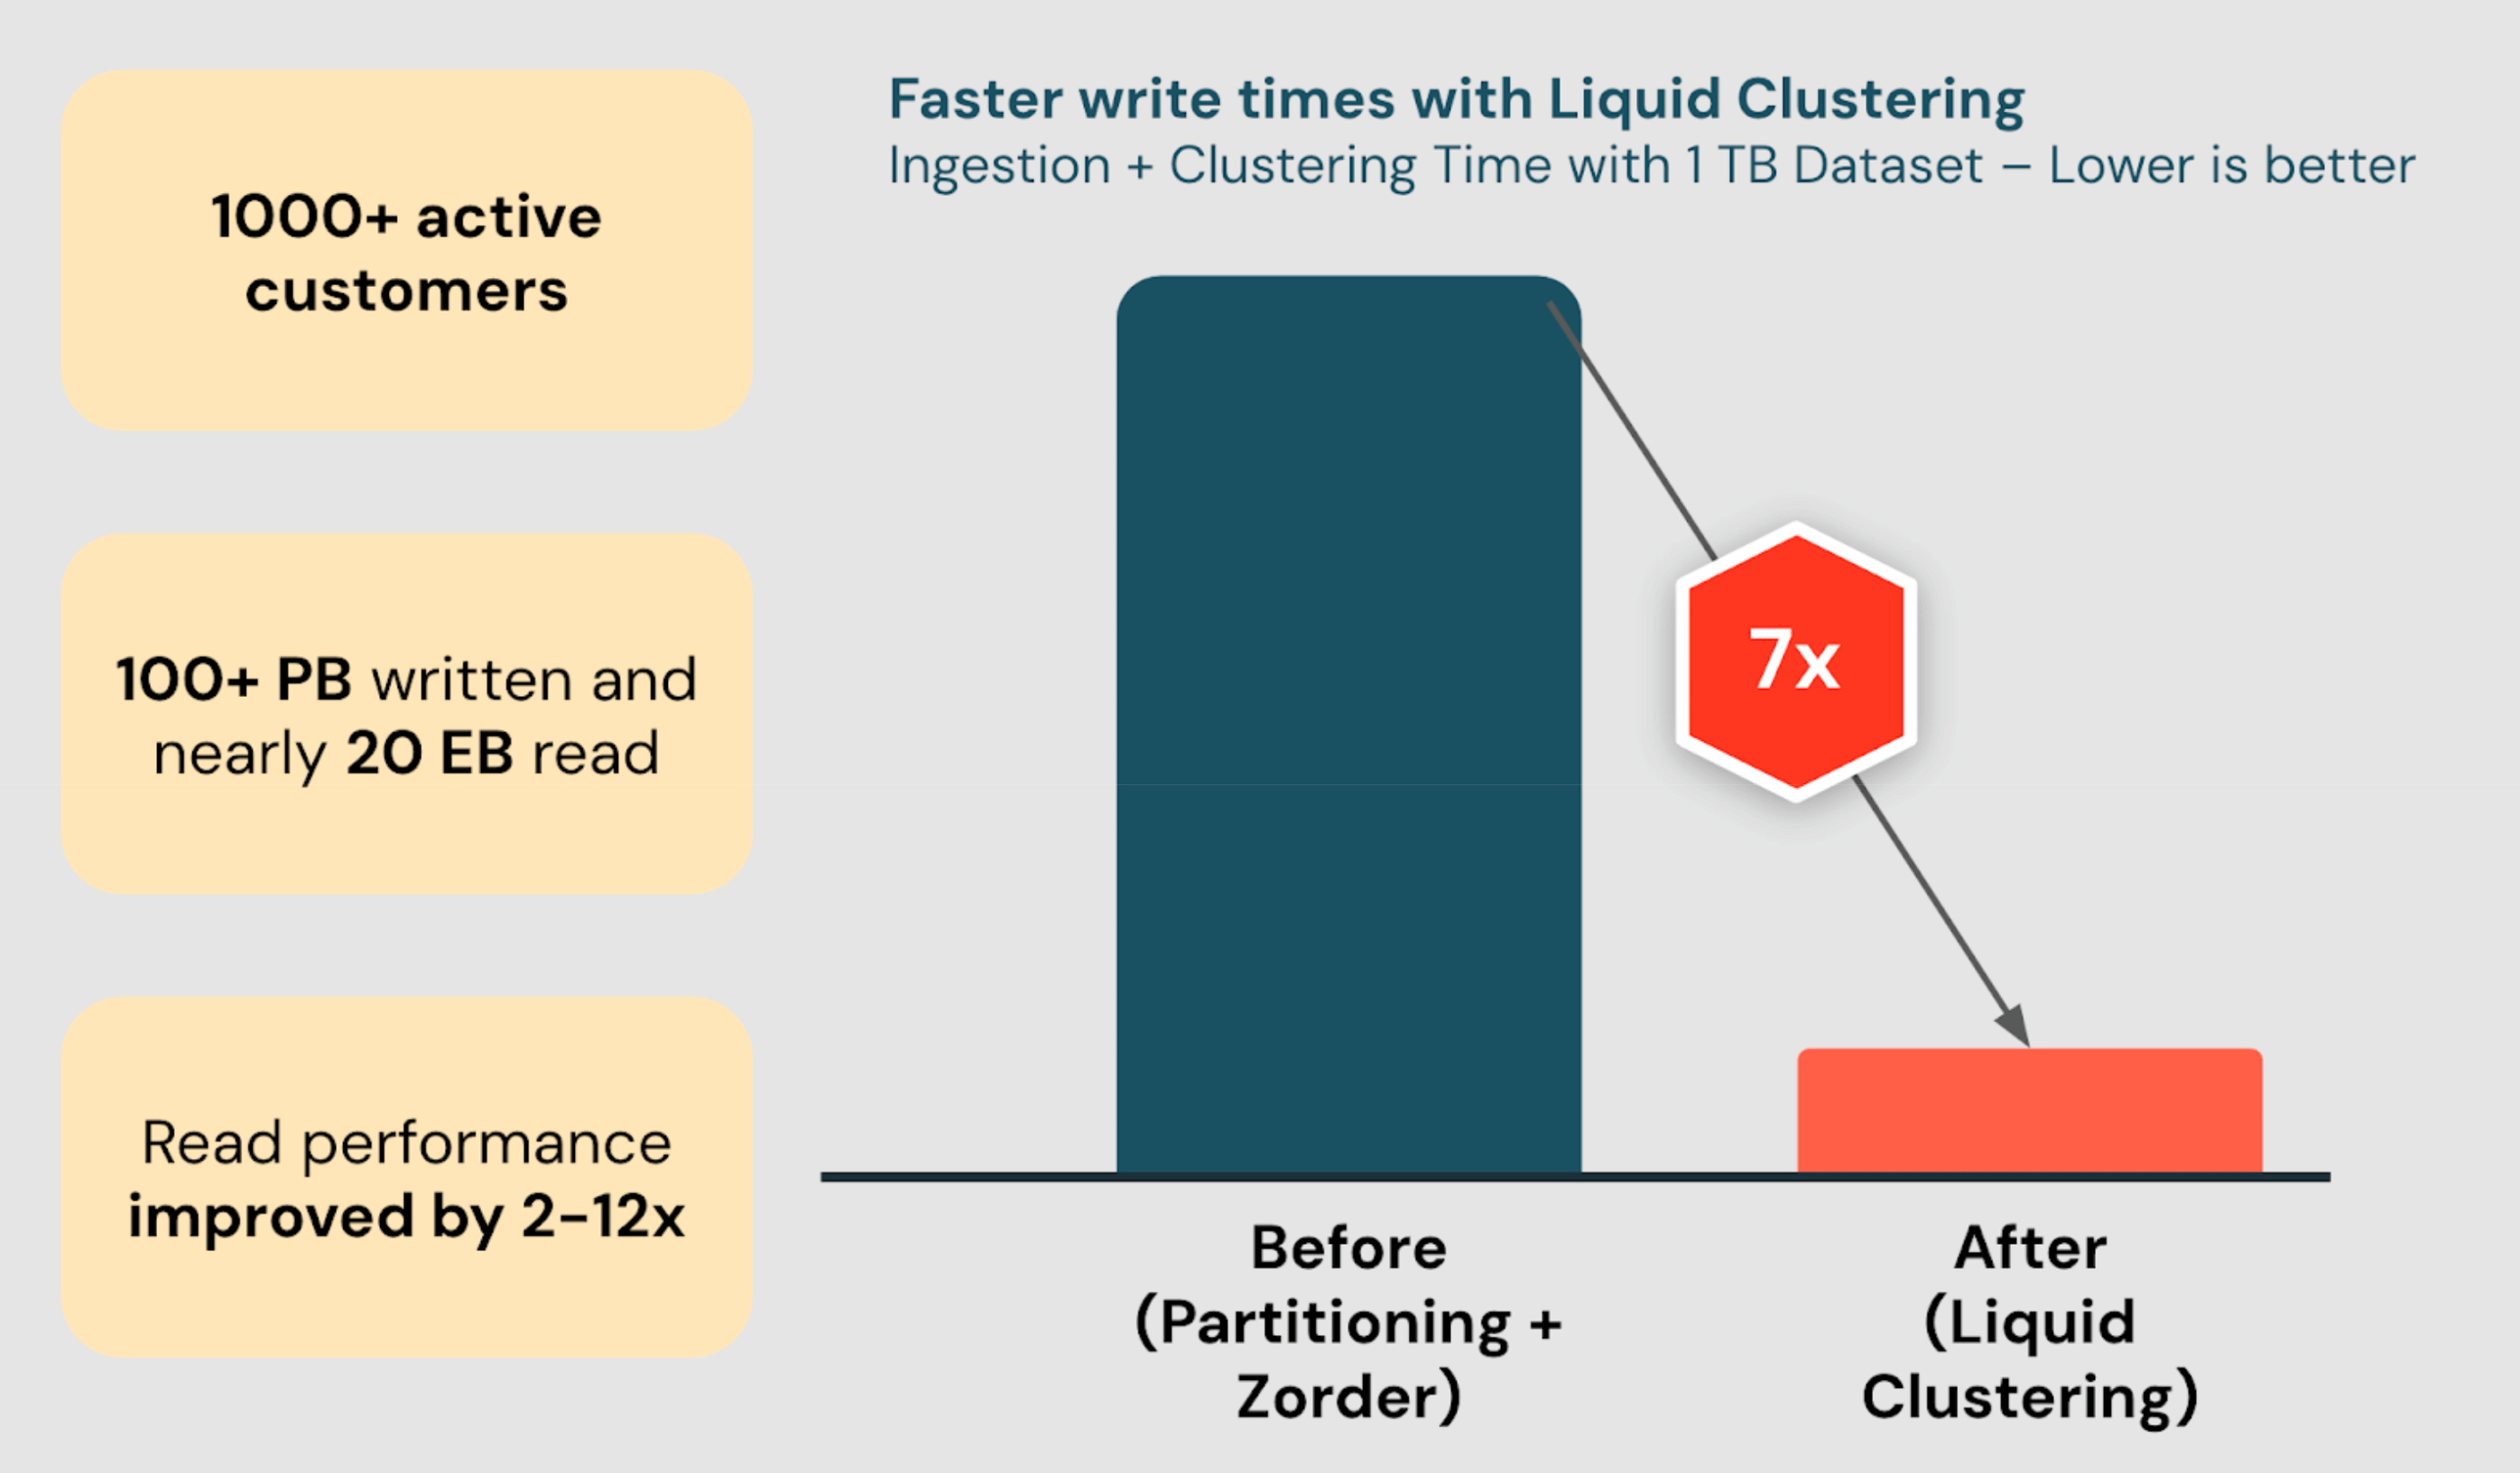 Saying Basic Availability of Liquid Clustering